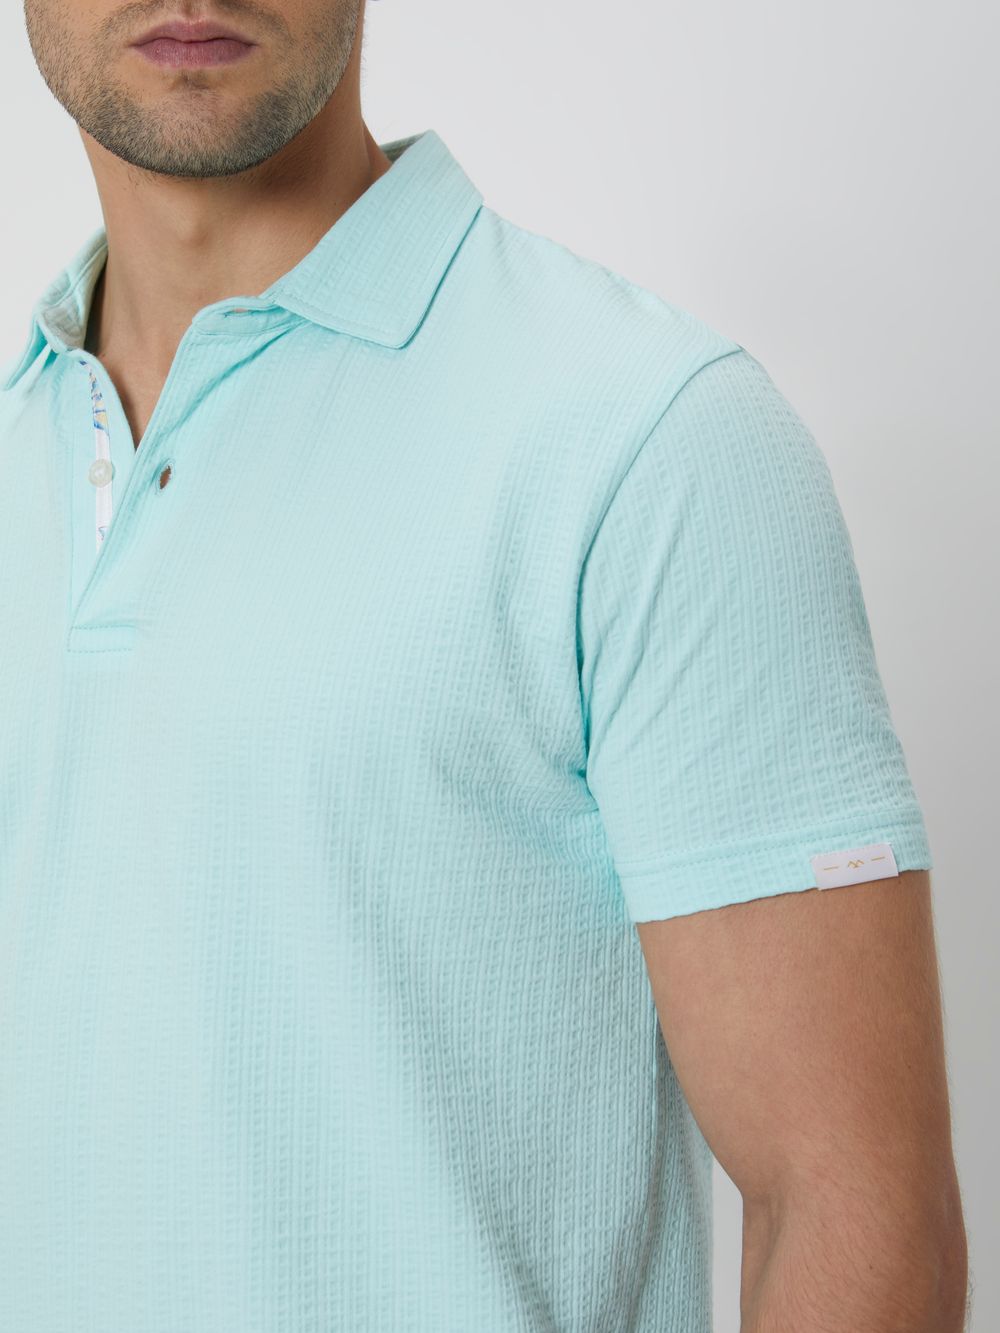 Turquoise Textured Plain Slim Fit Textured Jersey Polo